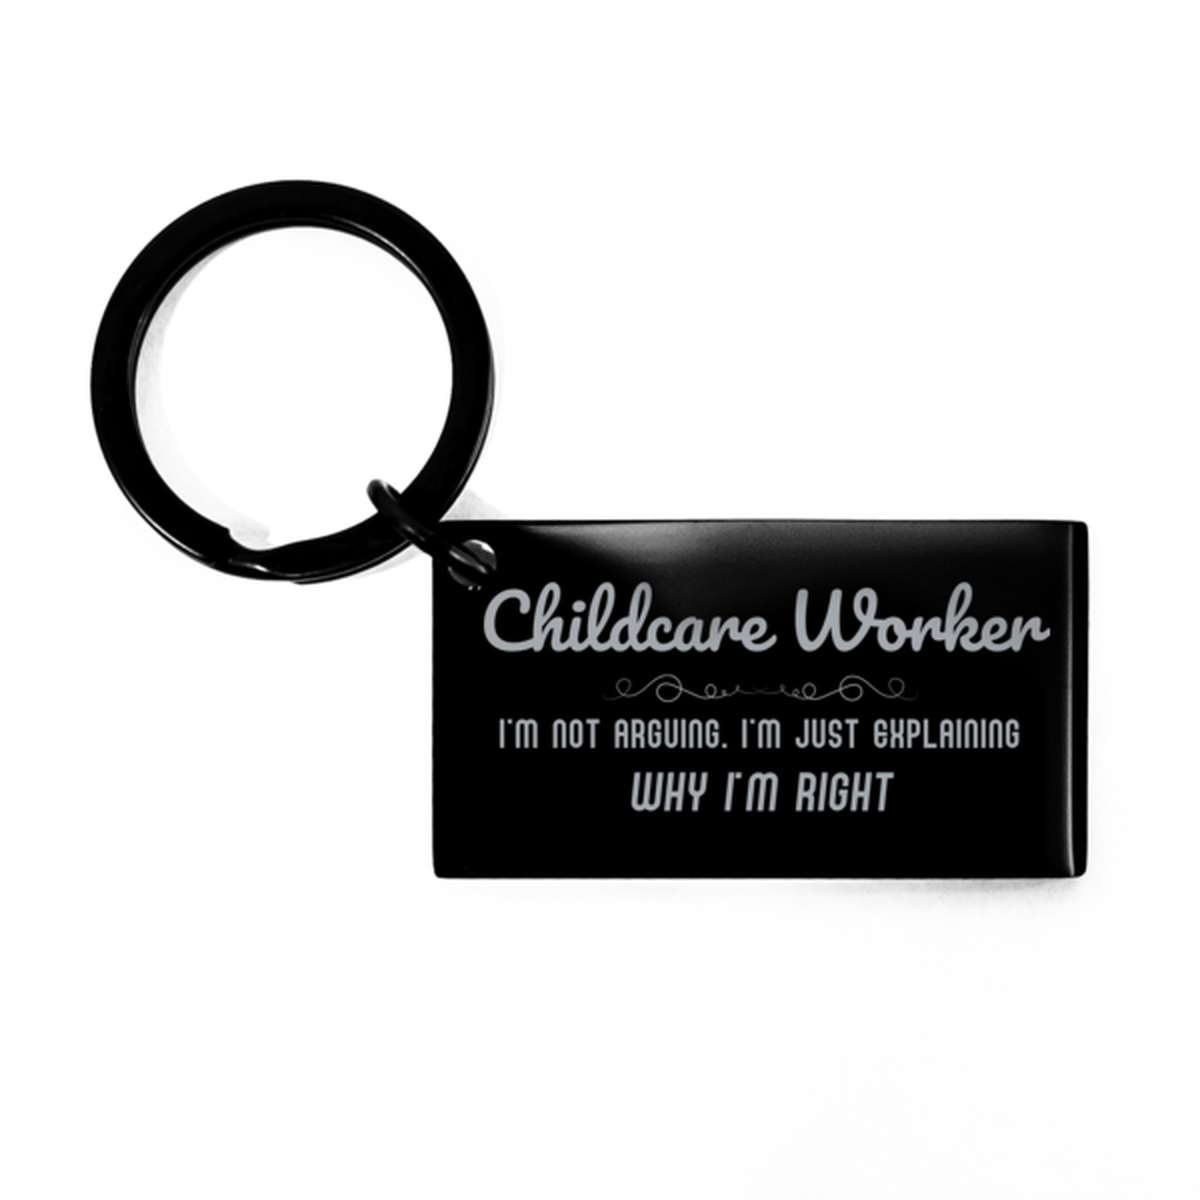 Childcare Worker I'm not Arguing. I'm Just Explaining Why I'm RIGHT Keychain, Funny Saying Quote Childcare Worker Gifts For Childcare Worker Graduation Birthday Christmas Gifts for Men Women Coworker